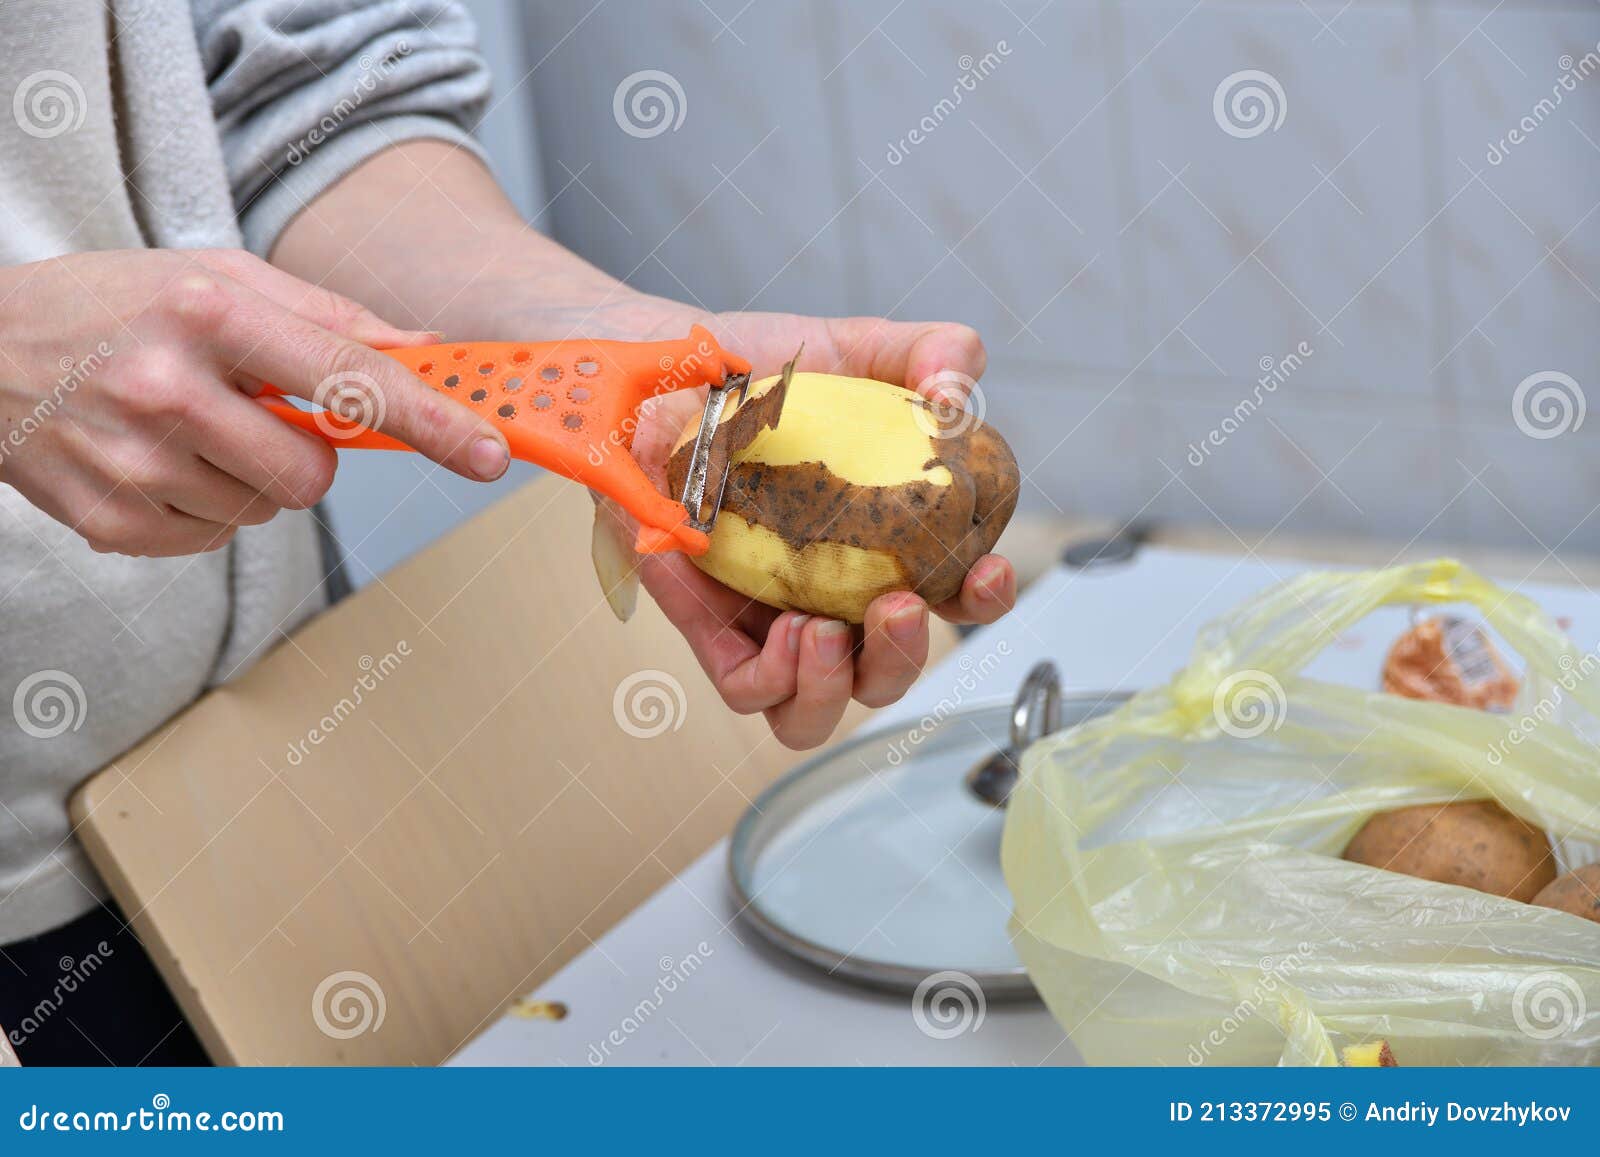 hands of a young woman peeling potatoes with kitchen utensil on a wooden board